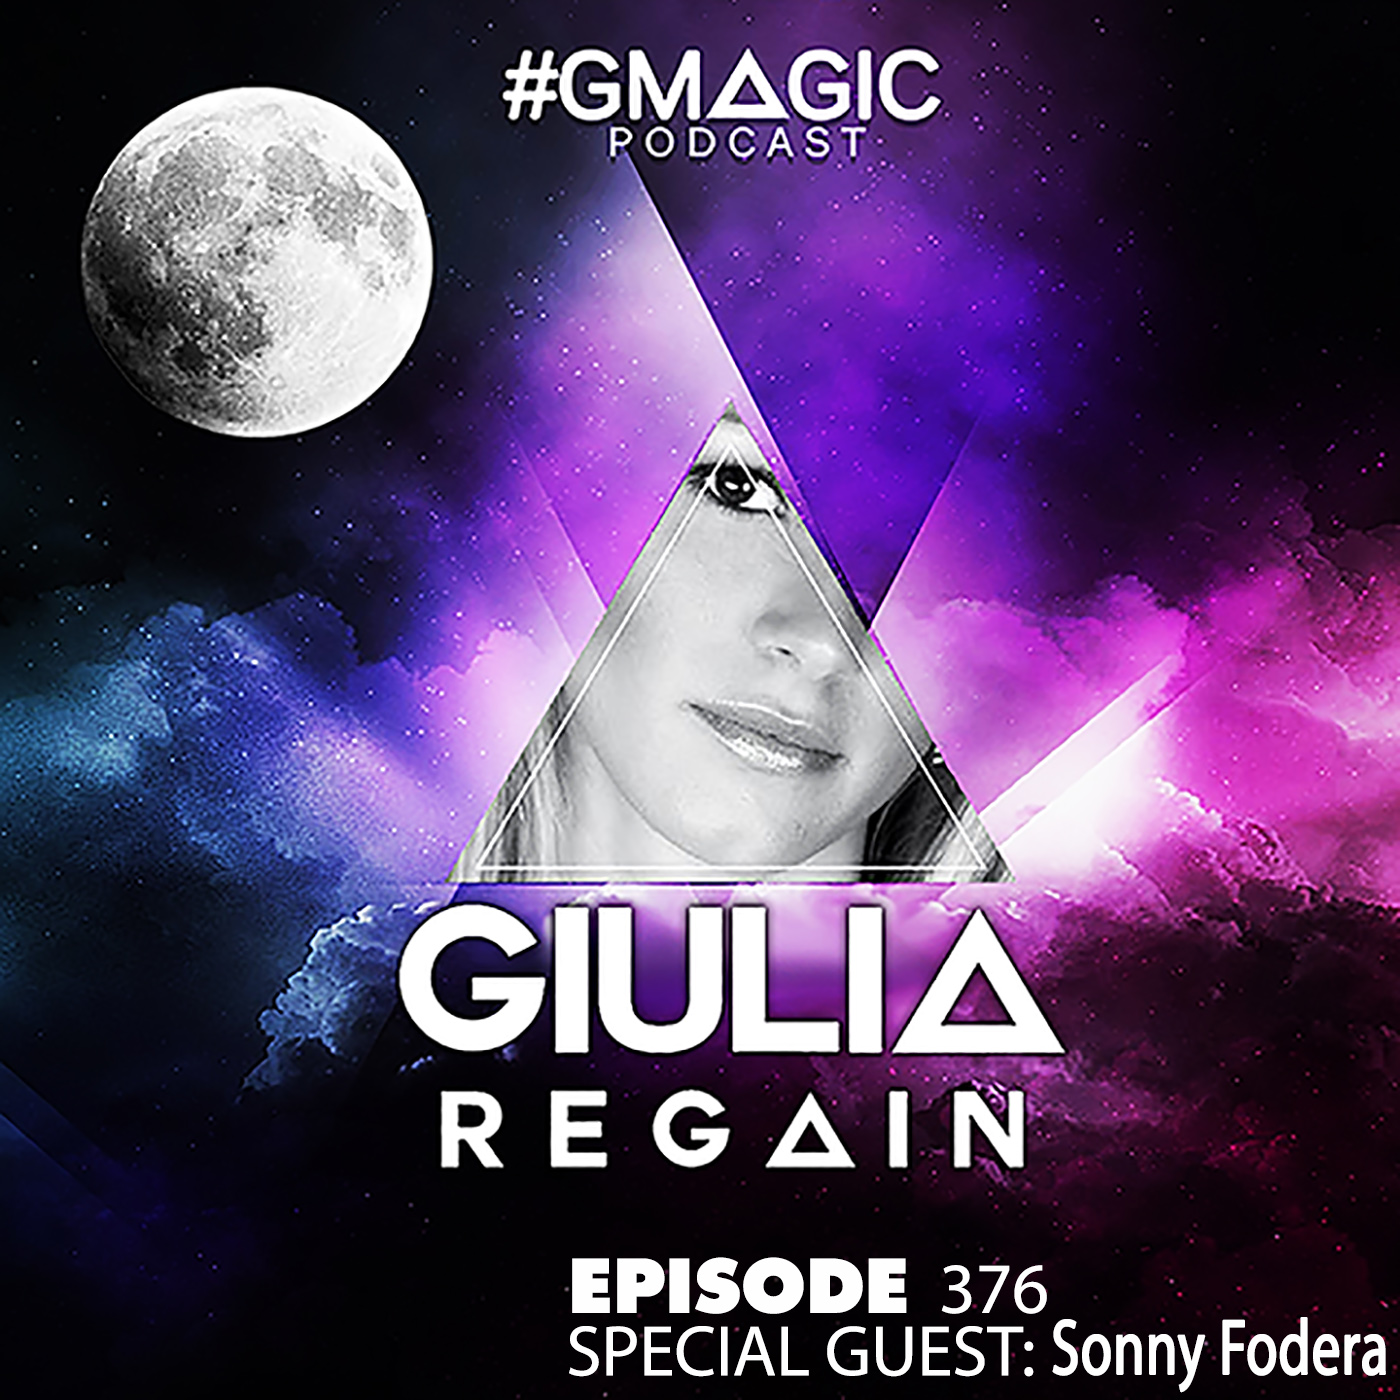 #Gmagic Podcast 376-Special Guest: Sonny Fodera